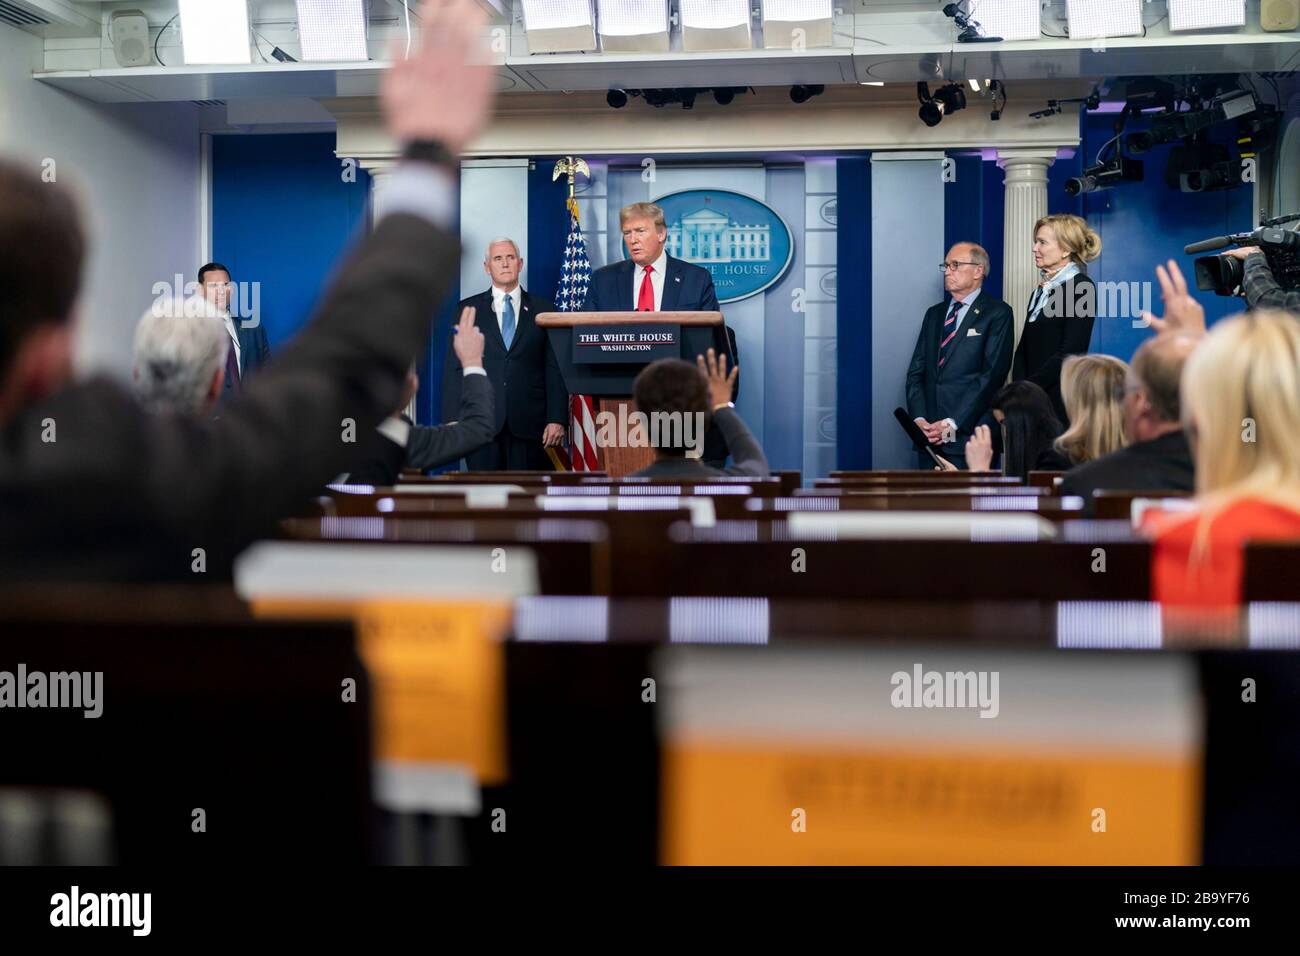 Washington, United States Of America. 24th Mar, 2020. Washington, United States of America. 24 March, 2020. U.S President Donald Trump addresses reporters at the Coronavirus Task Force briefing in the Press Briefing Room of the White House March 24, 2020 in Washington, DC. Amb. Deborah Birx, White House Coronavirus Task Force Response Coordinator, Larry Kudlow, Director of the National Economic Council and Dr. Anthony Fauci, Director, National Institute of Allergy and Infectious Diseases look on. Credit: Andrea Hanks/White House Photo/Alamy Live News Stock Photo